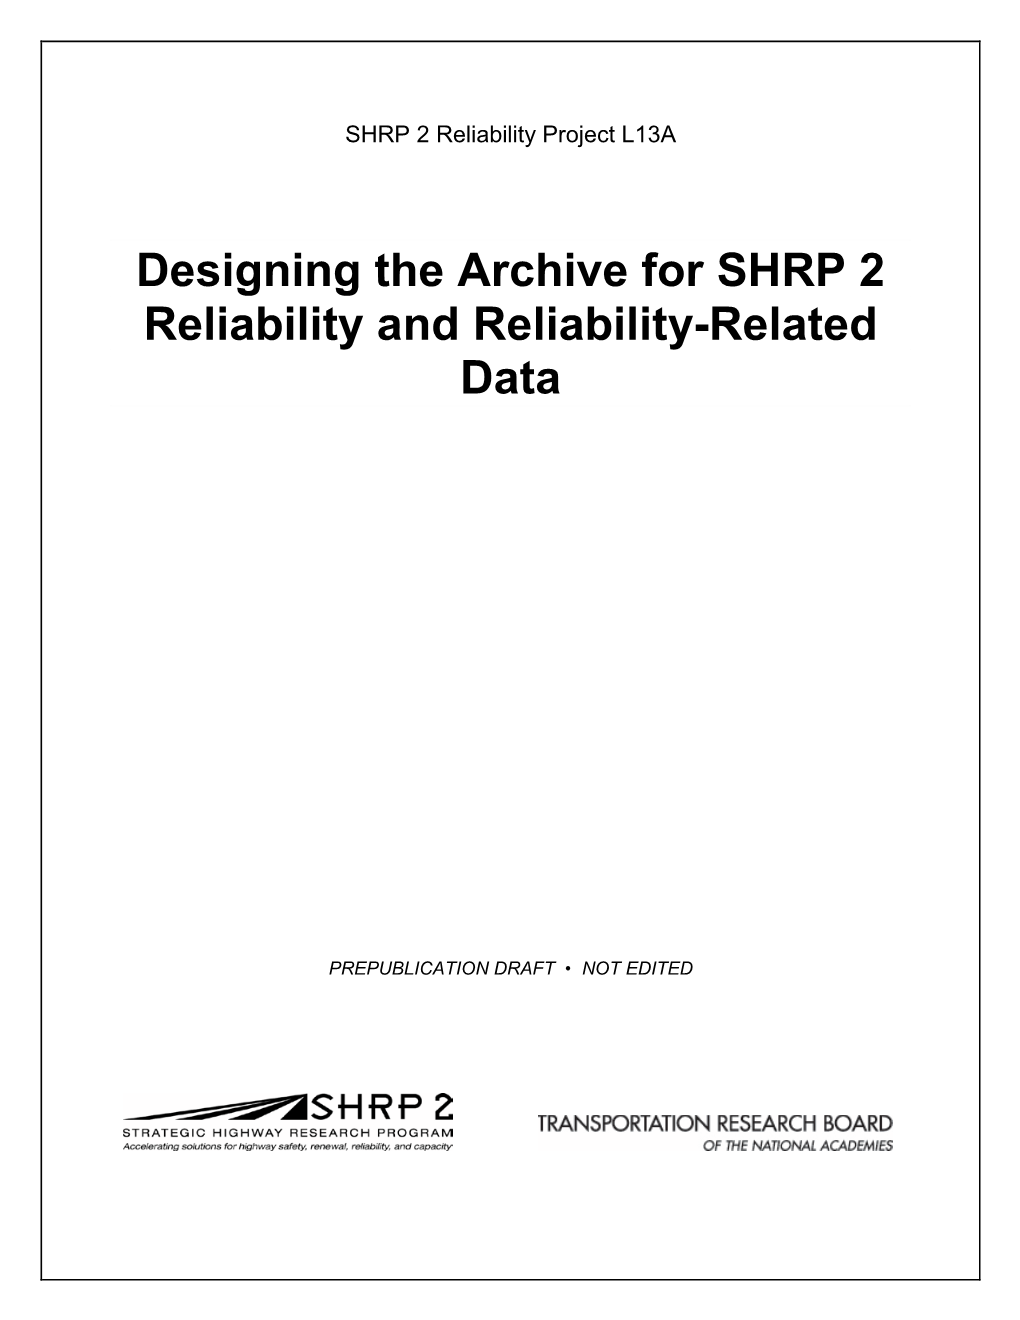 Designing the Archive for SHRP 2 Reliability and Reliability-Related Data